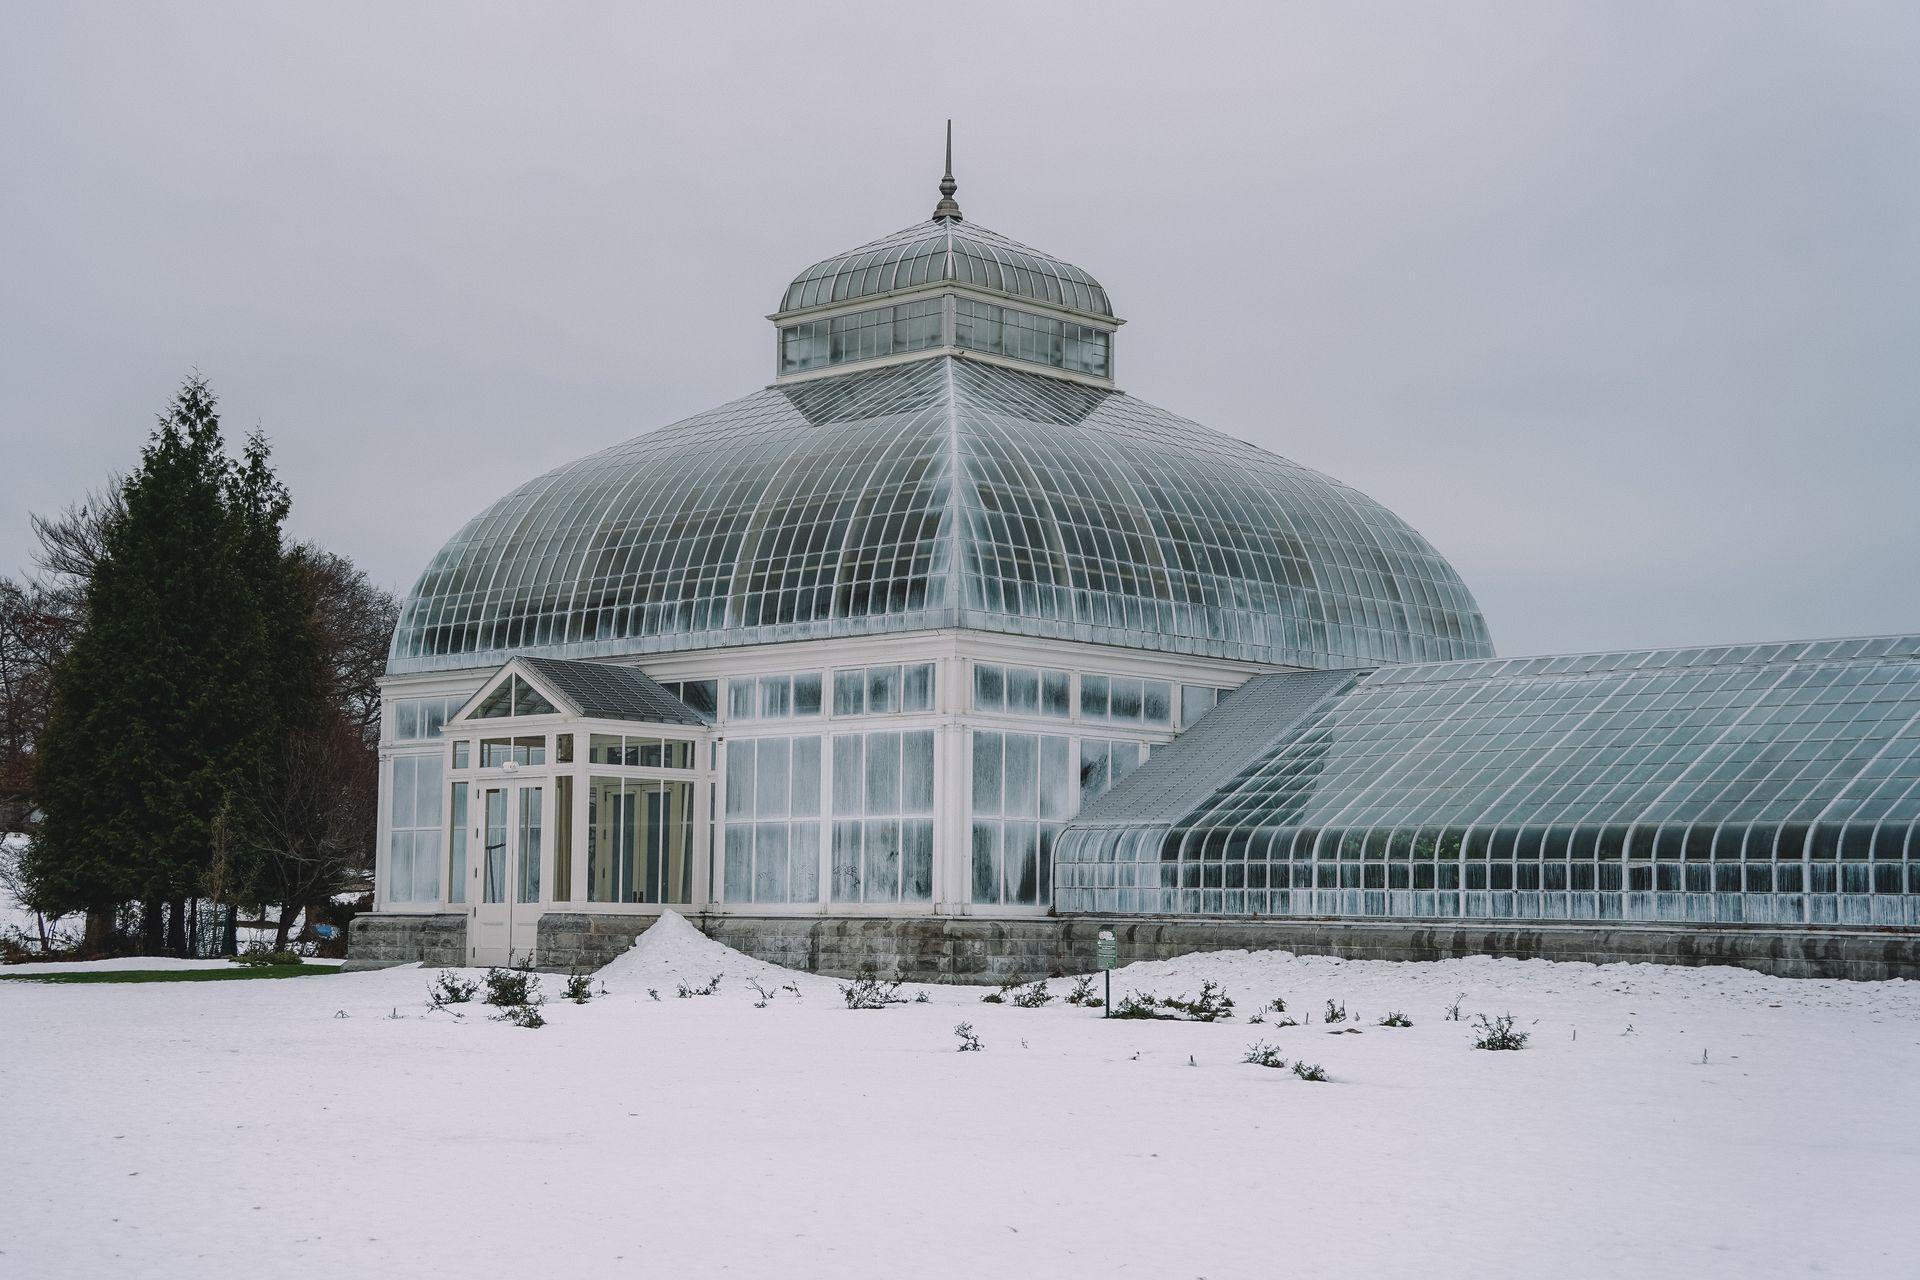 A glass greenhouse with snow on the ground outside.